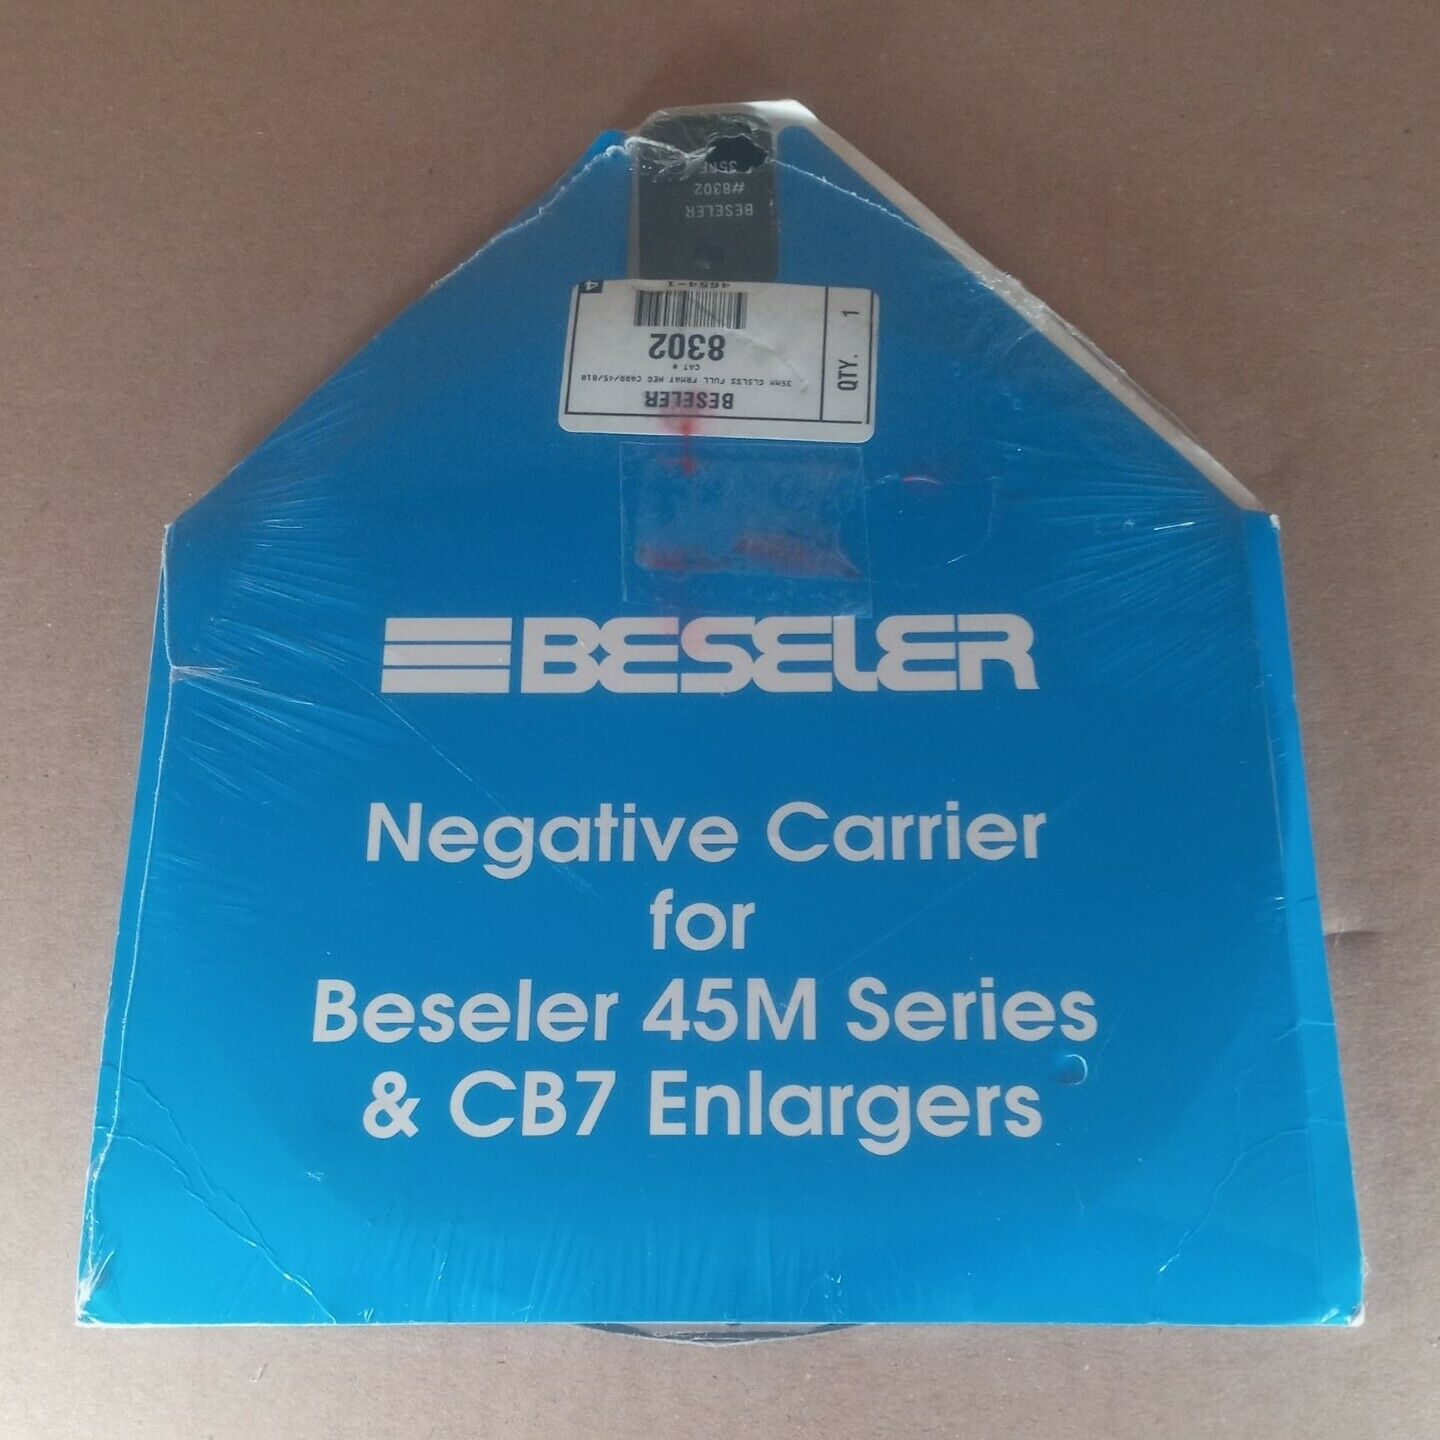 Beseler 25mm X 37mm Film Negative Carrier #8302 For 45m Series And Cb7 Enlargers